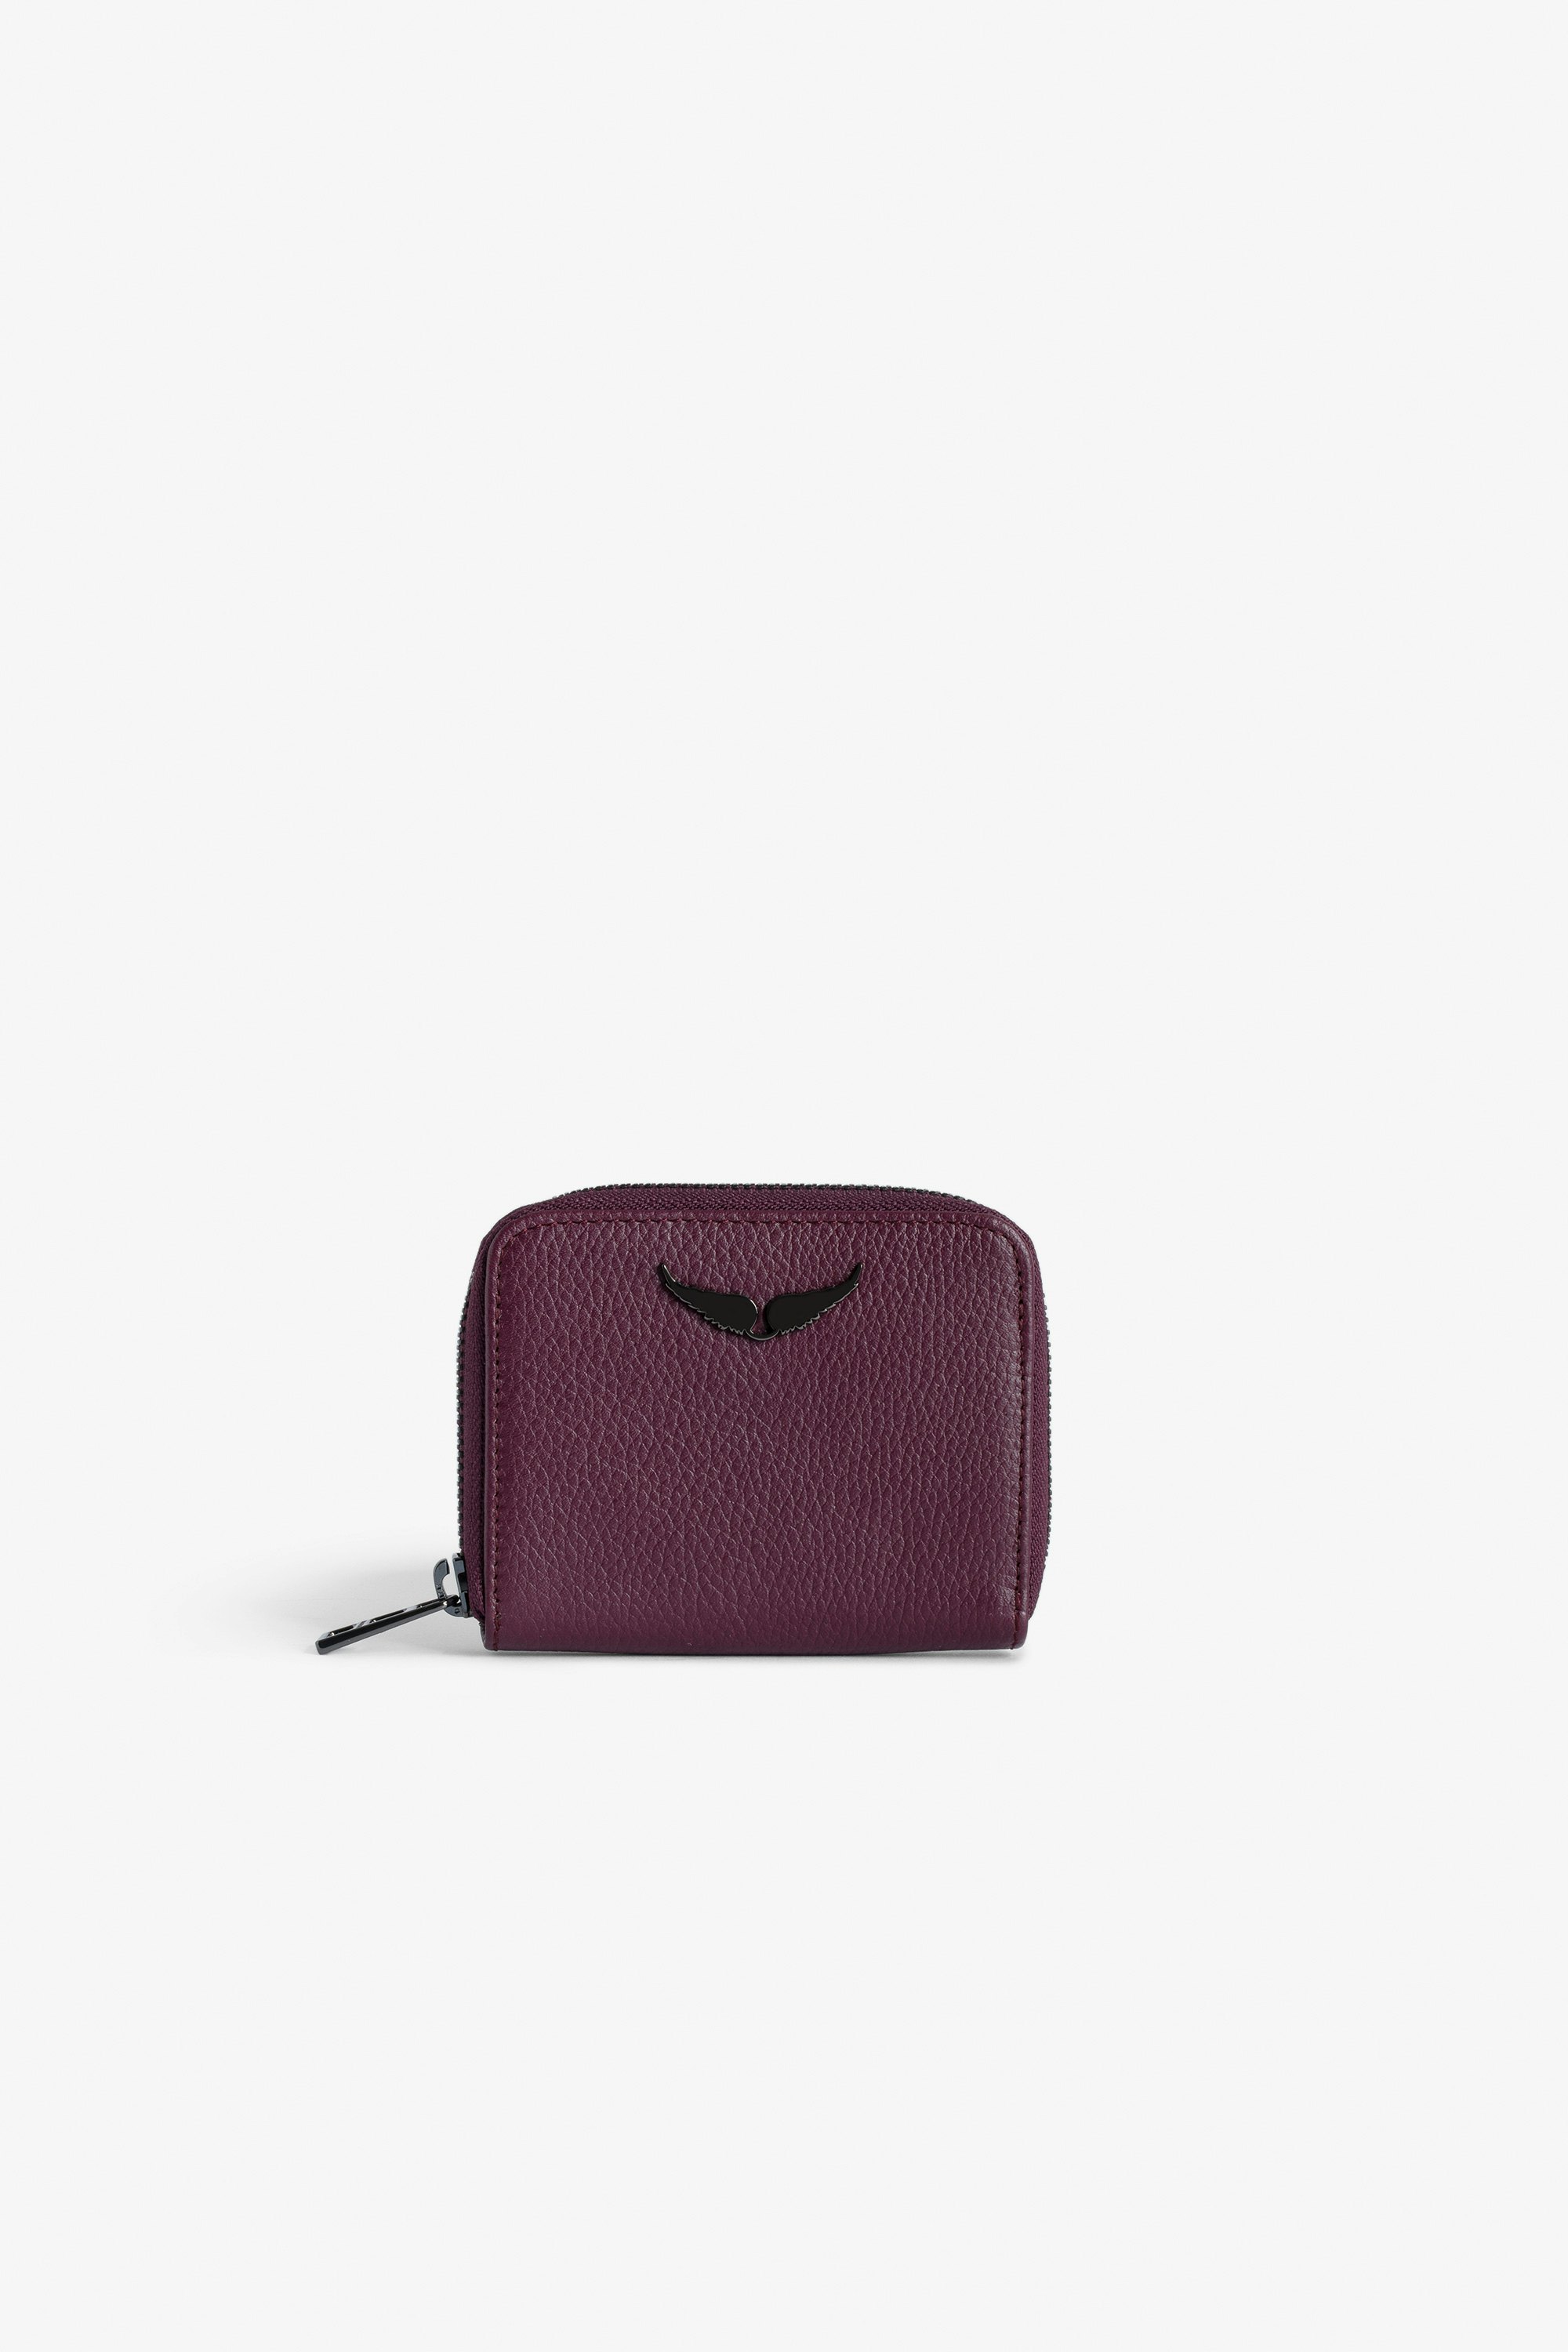 Mini ZV Coin 財布 - Women’s burgundy grained leather wallet with wings charm.